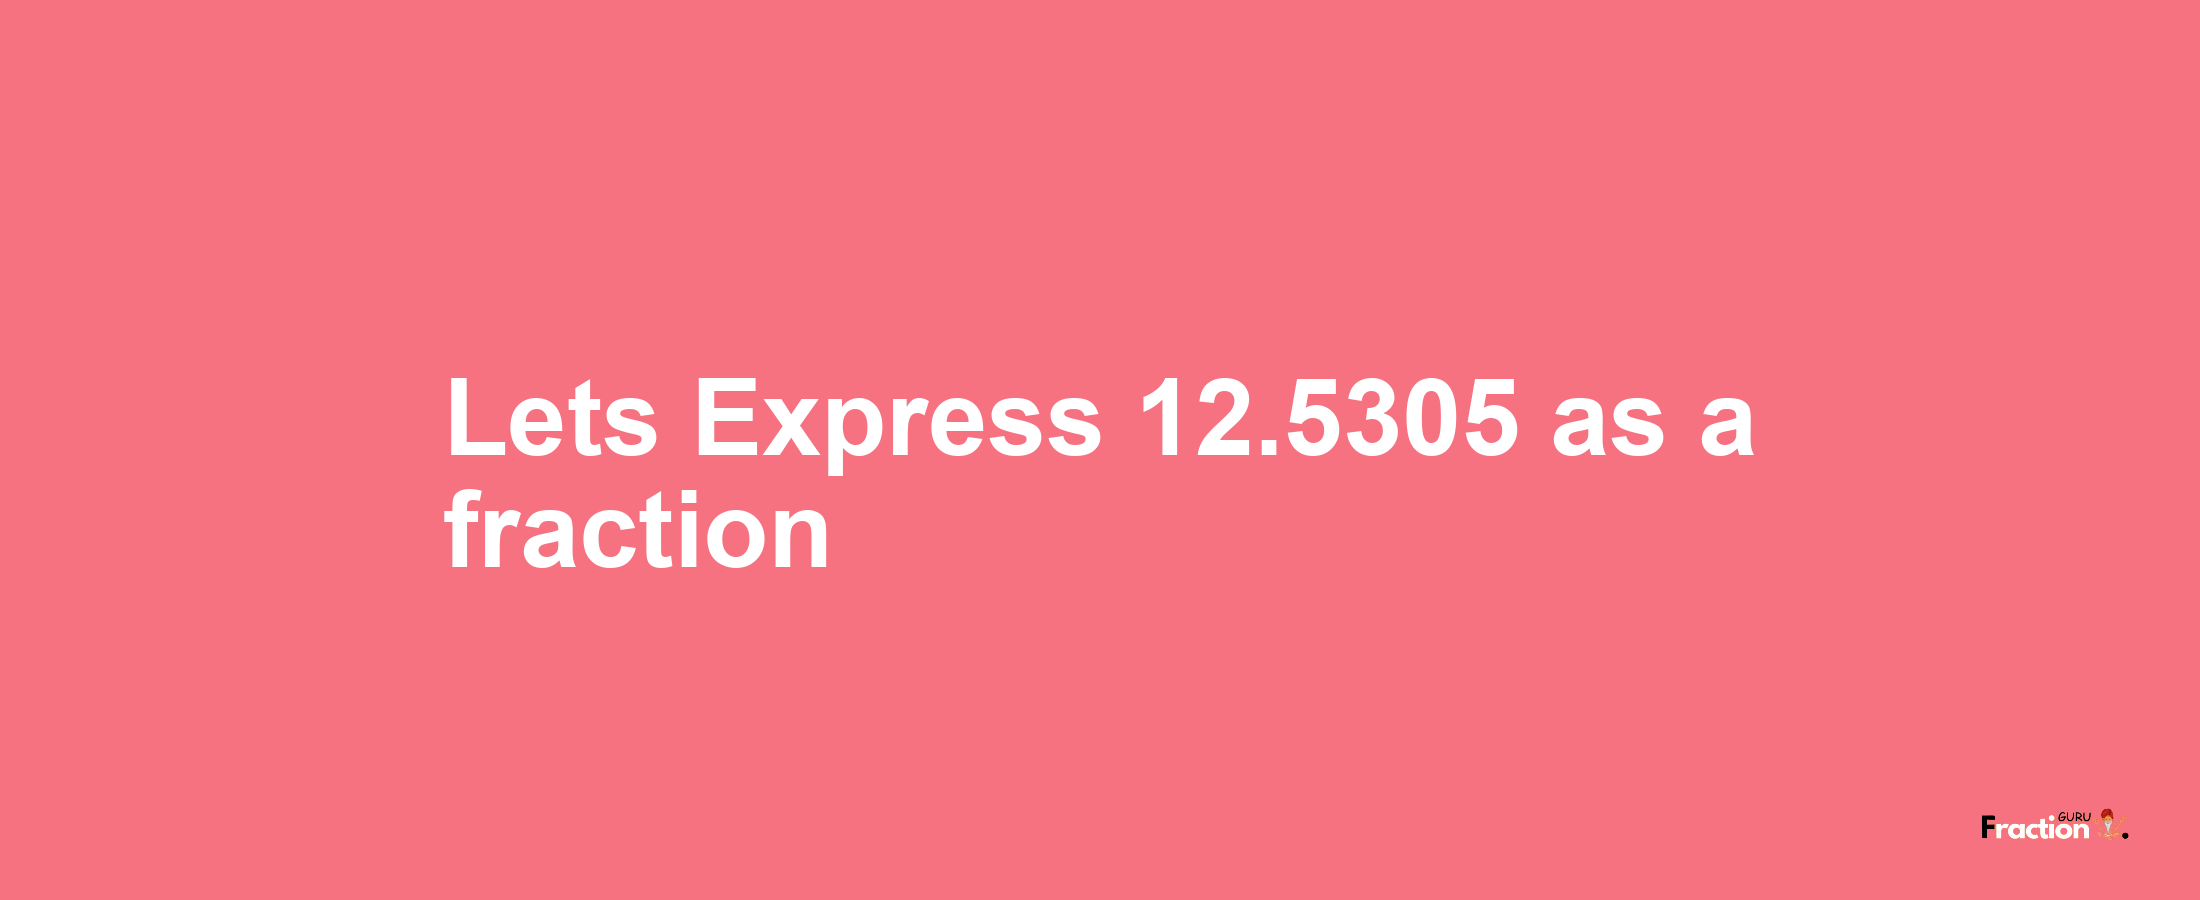 Lets Express 12.5305 as afraction